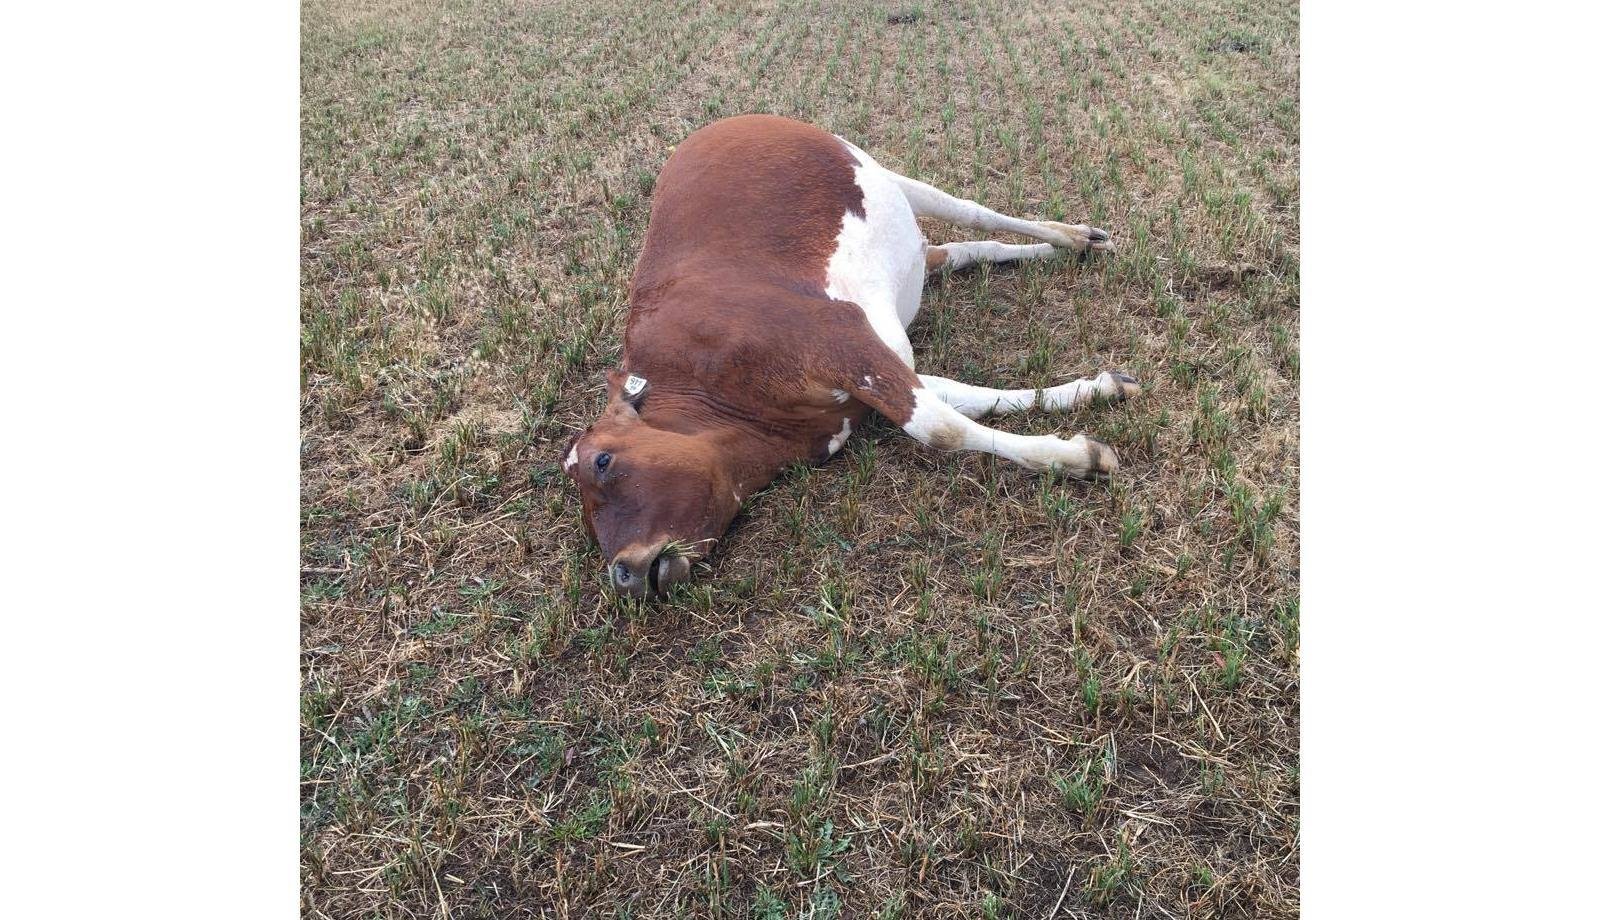 One of the cows which died in the lightning strike